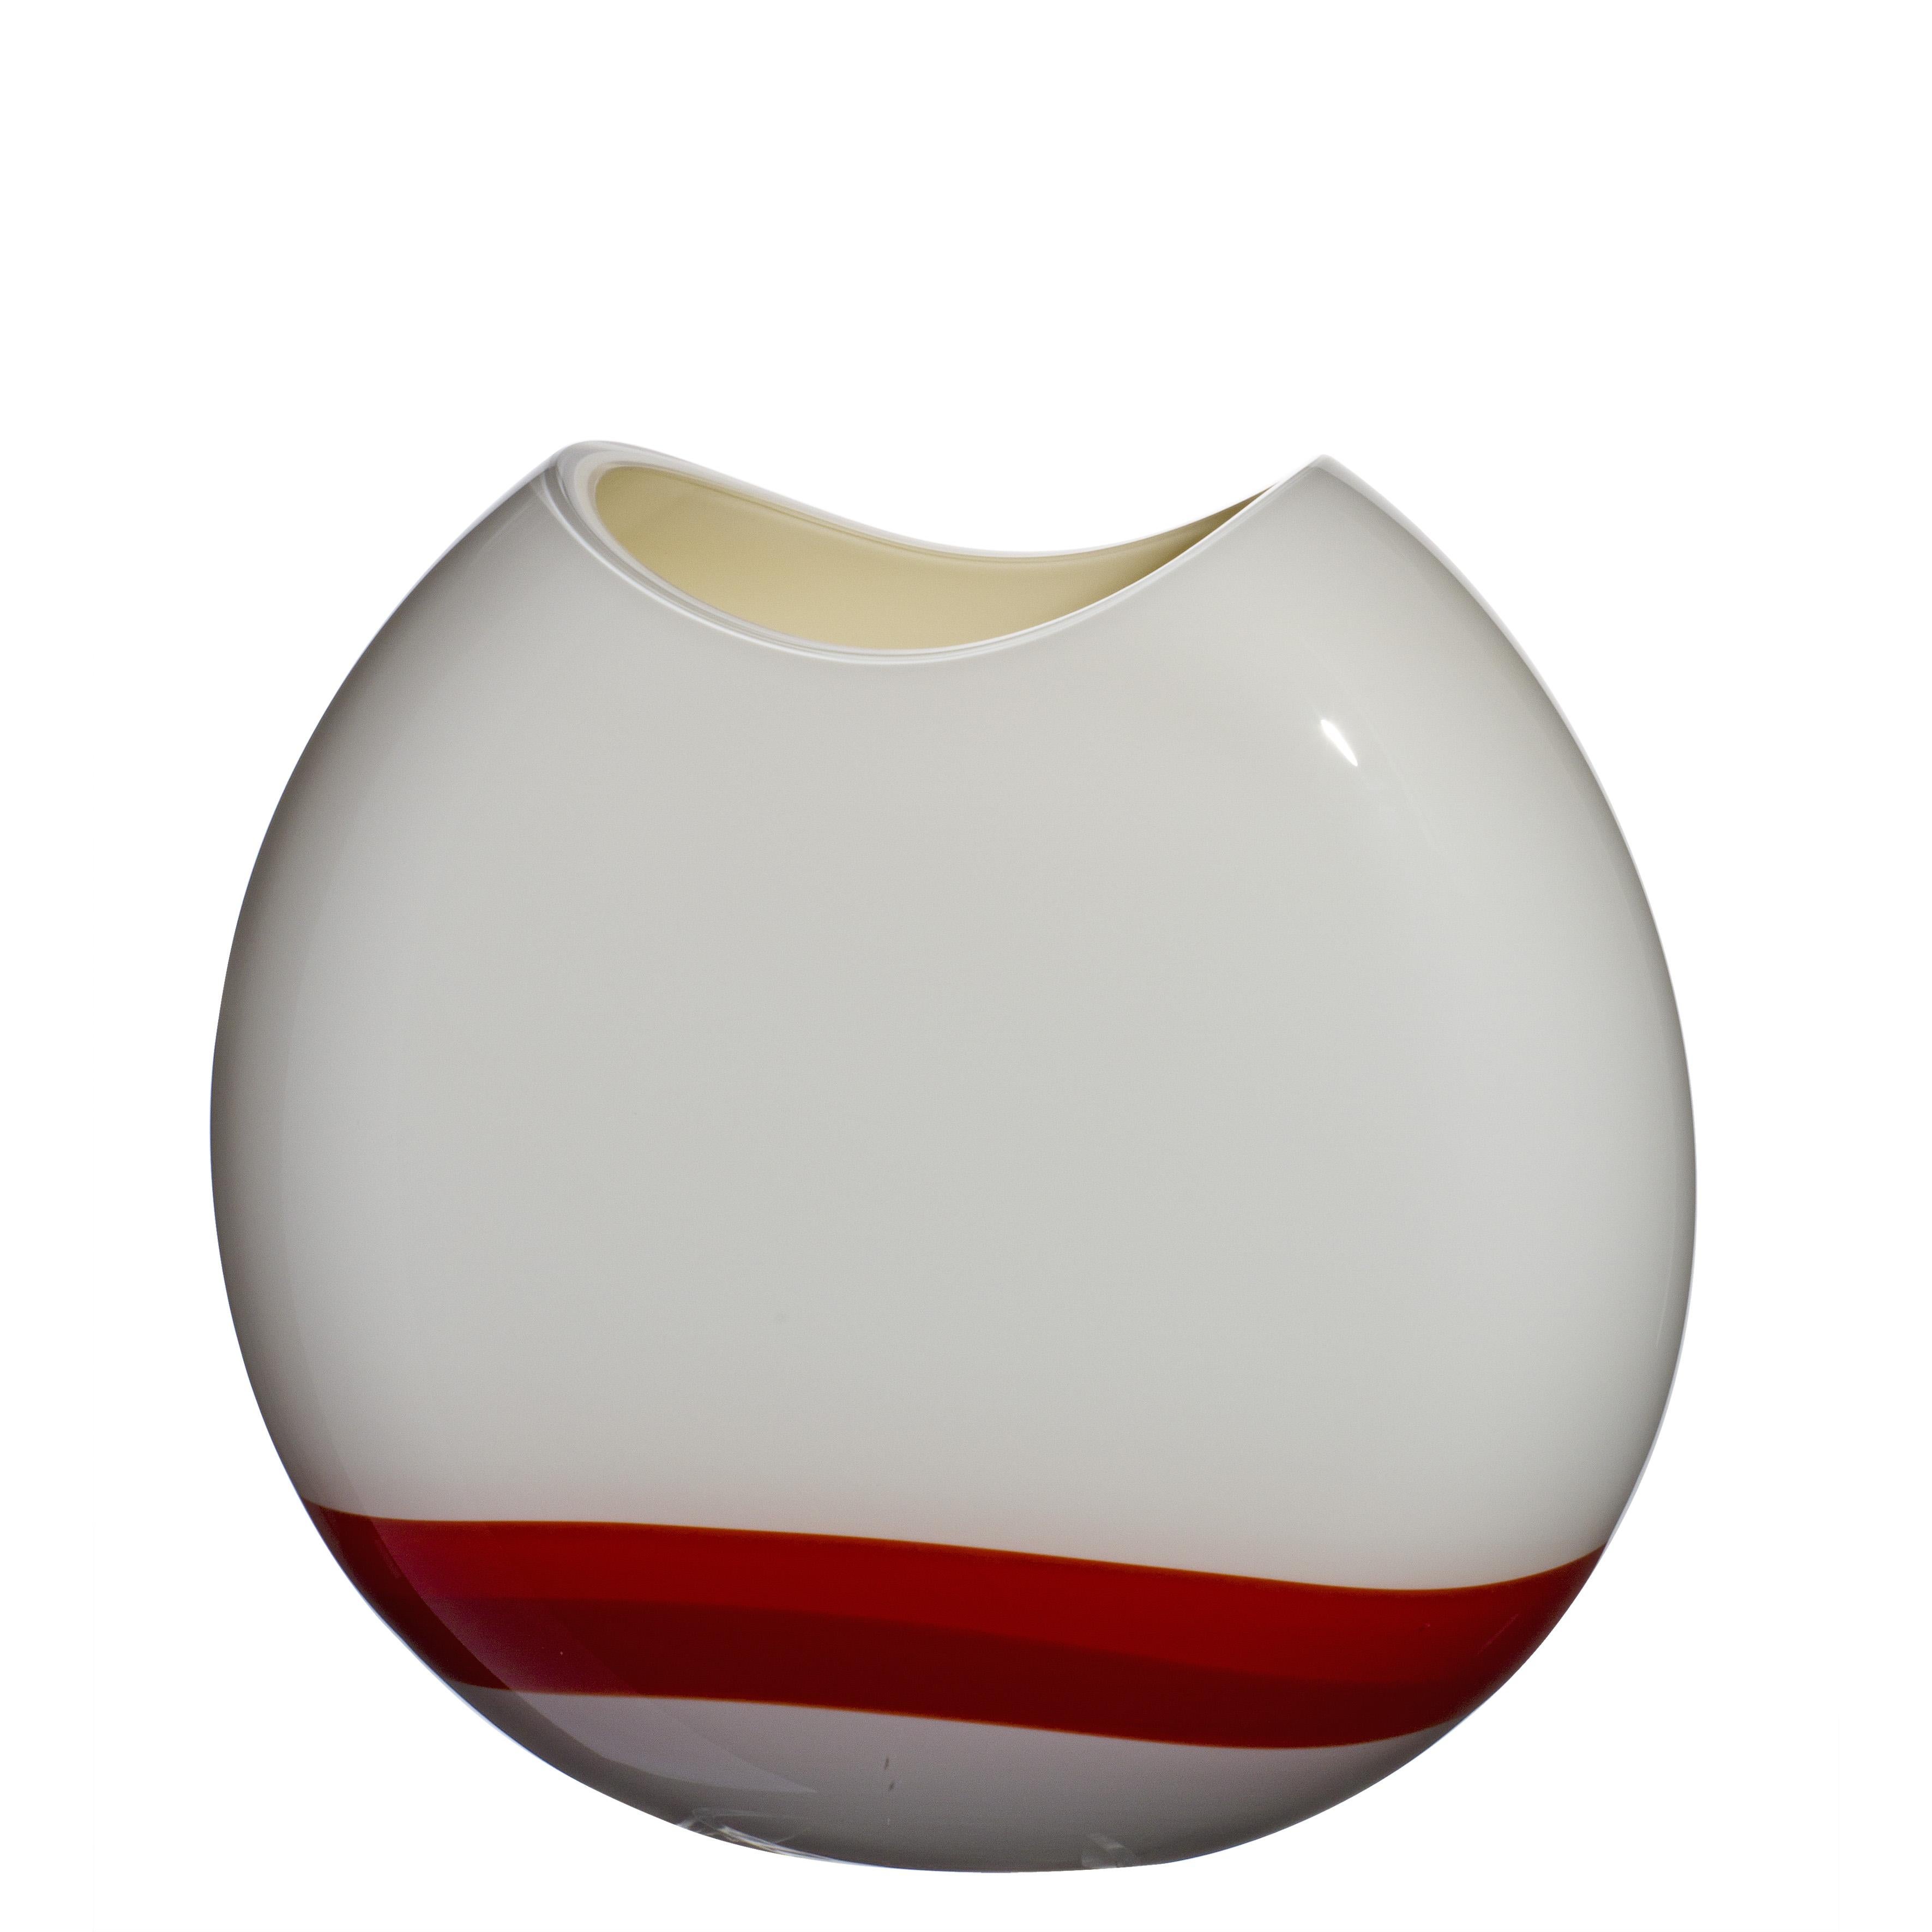 Small Eclissi Vase in Red, Ivory, and Grey by Carlo Moretti For Sale